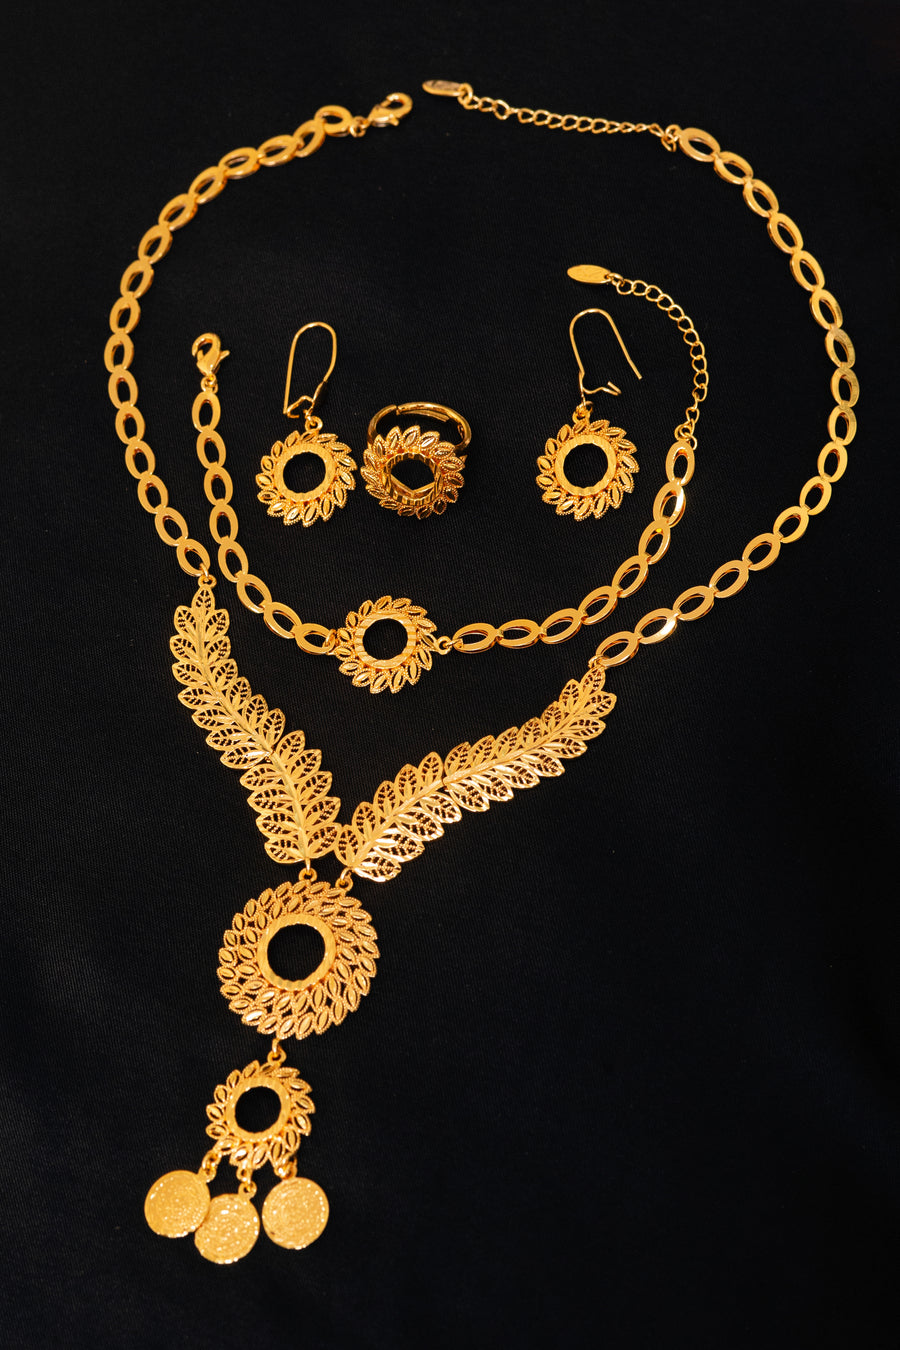 Artificial necklace and earrings ring and bracelet- Areeba's Couture